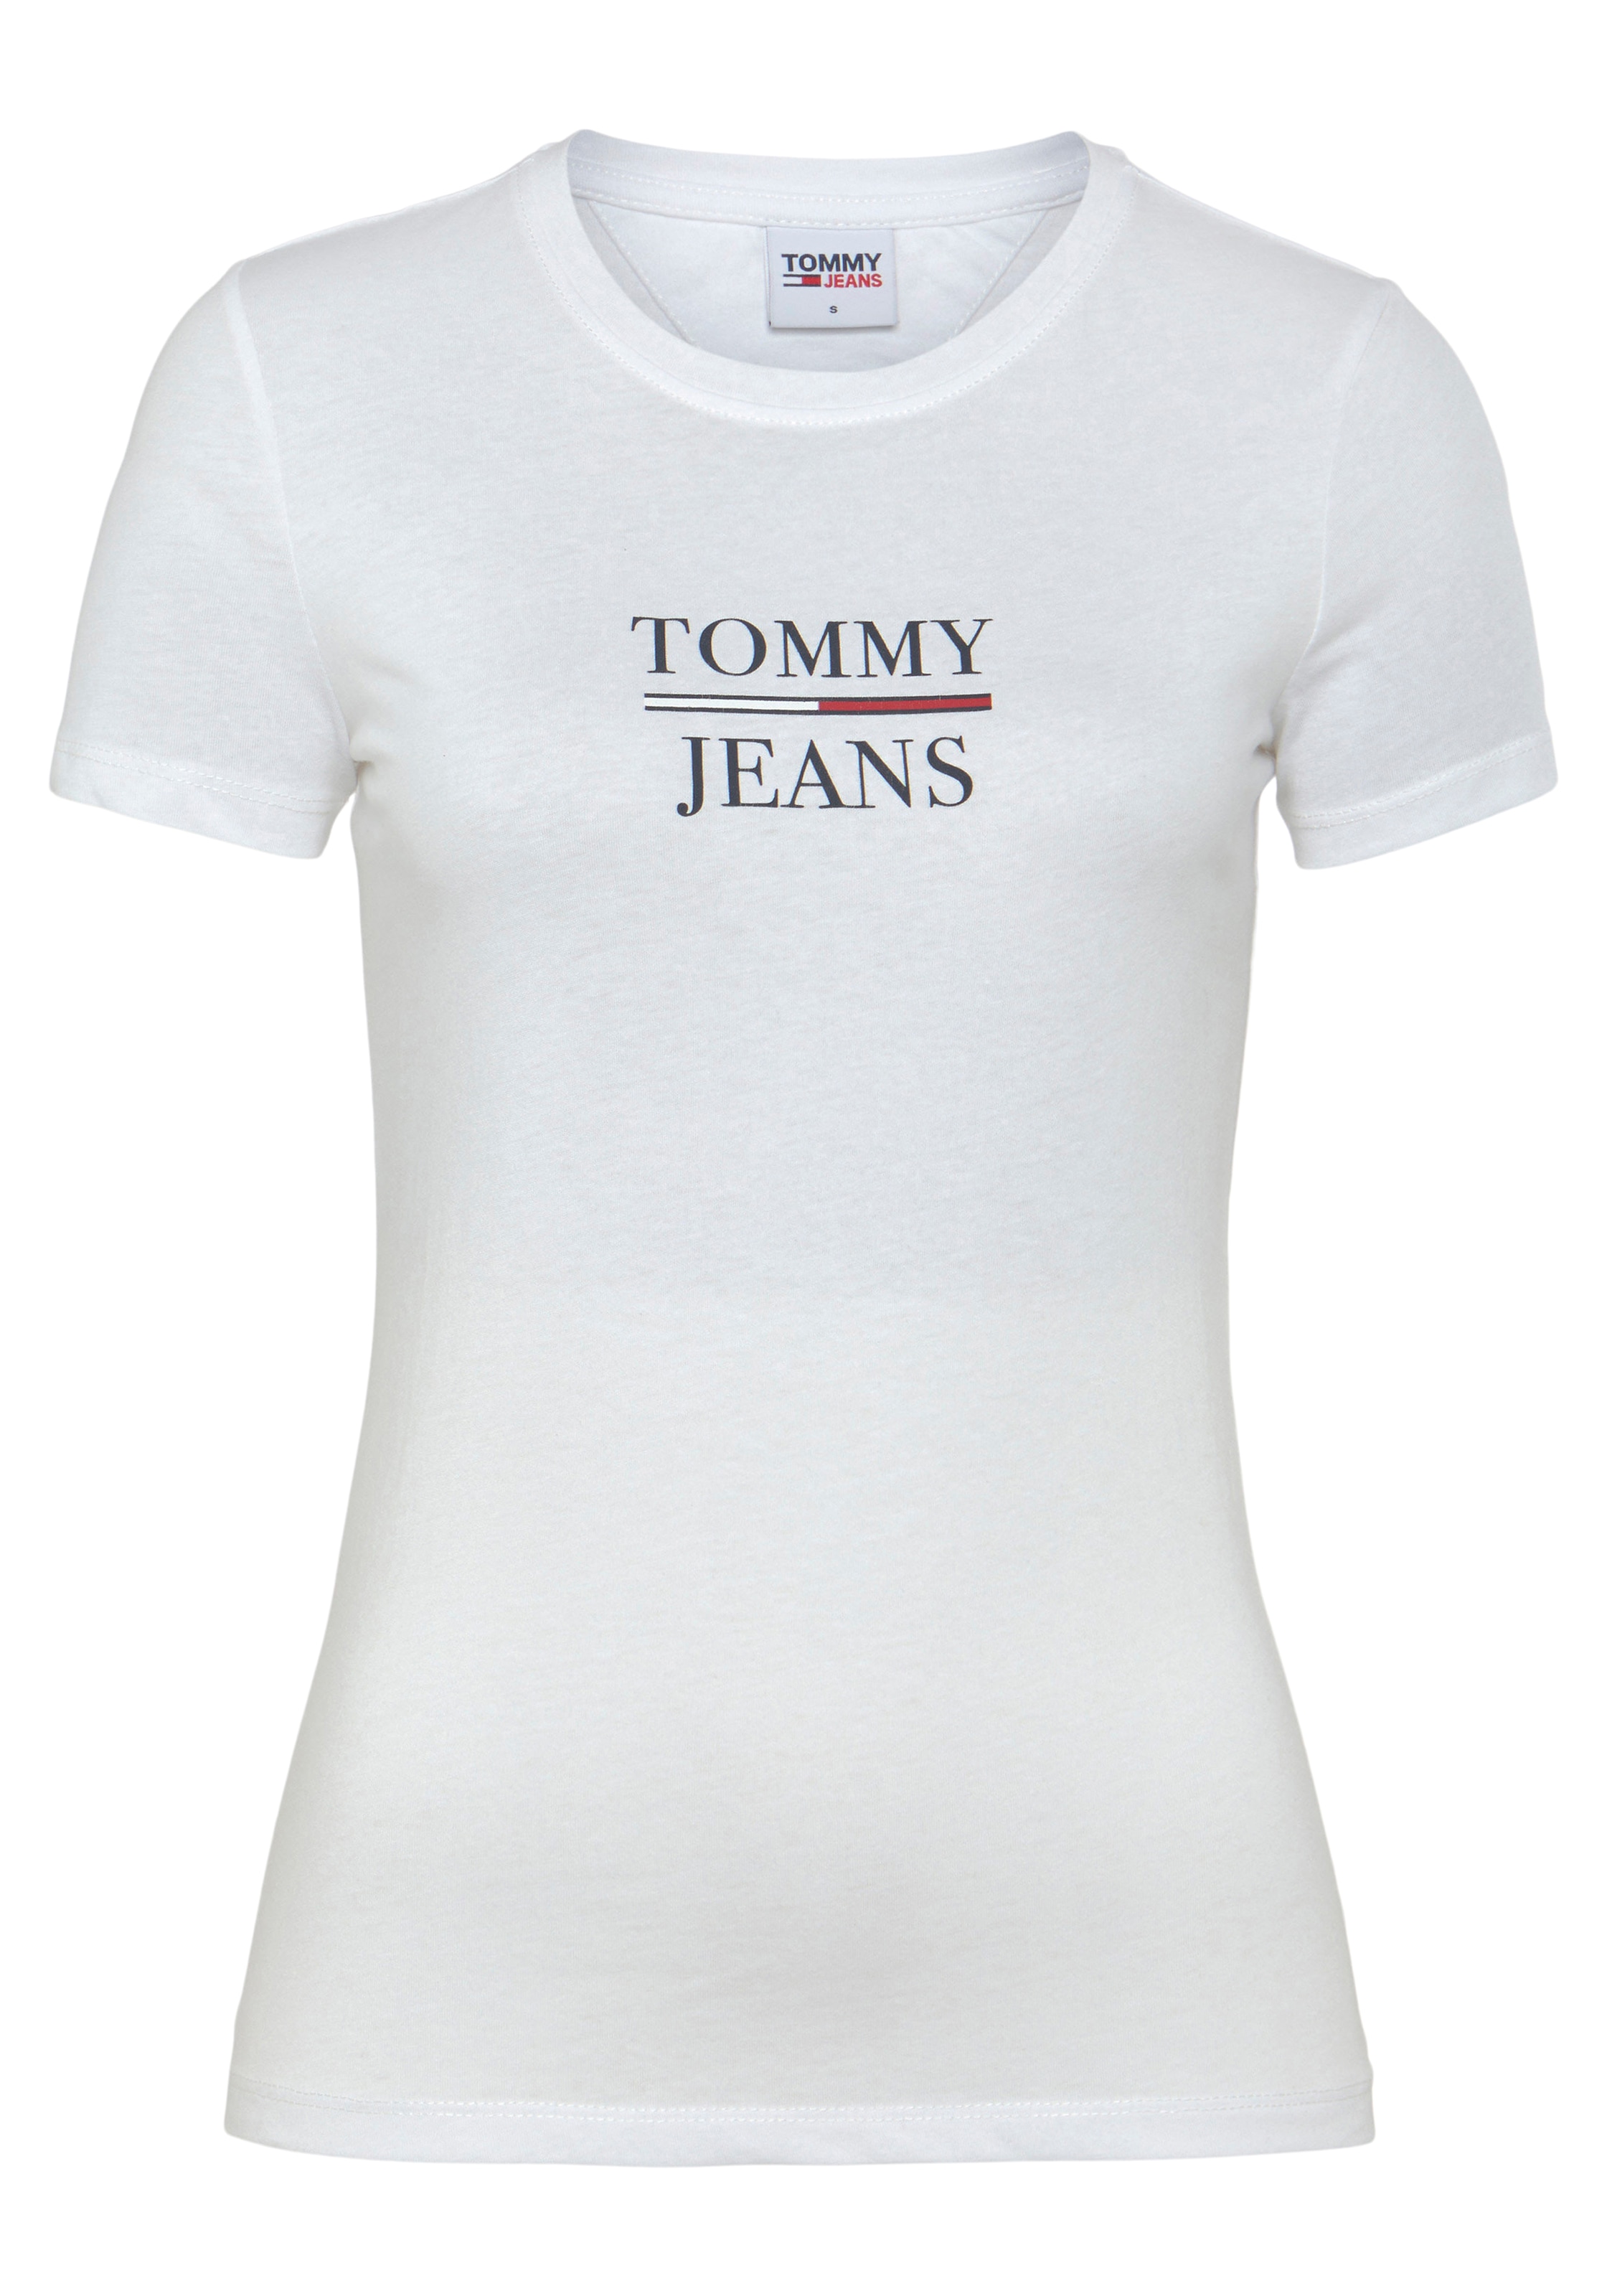 Tommy Jeans T-Shirt bei Skinny »TJW 2er-Pack) T ♕ ESS SS«, (Packung, 2PACK TOMMY